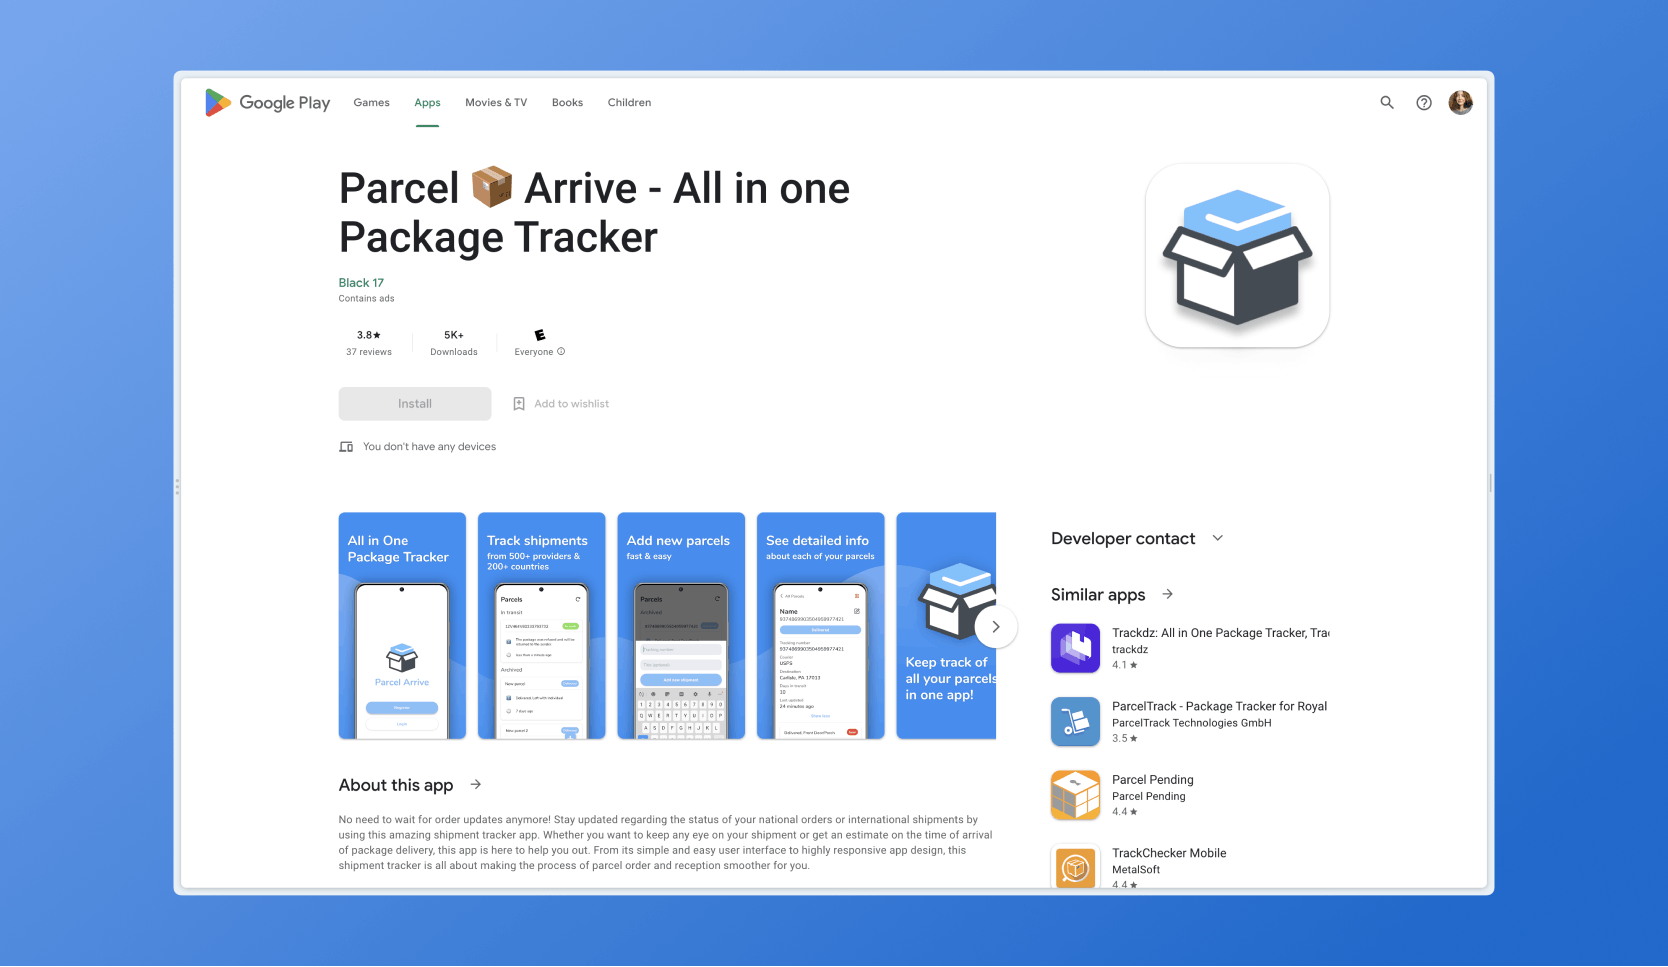 Google Playstore page for the package tracking app "Package Arrive"